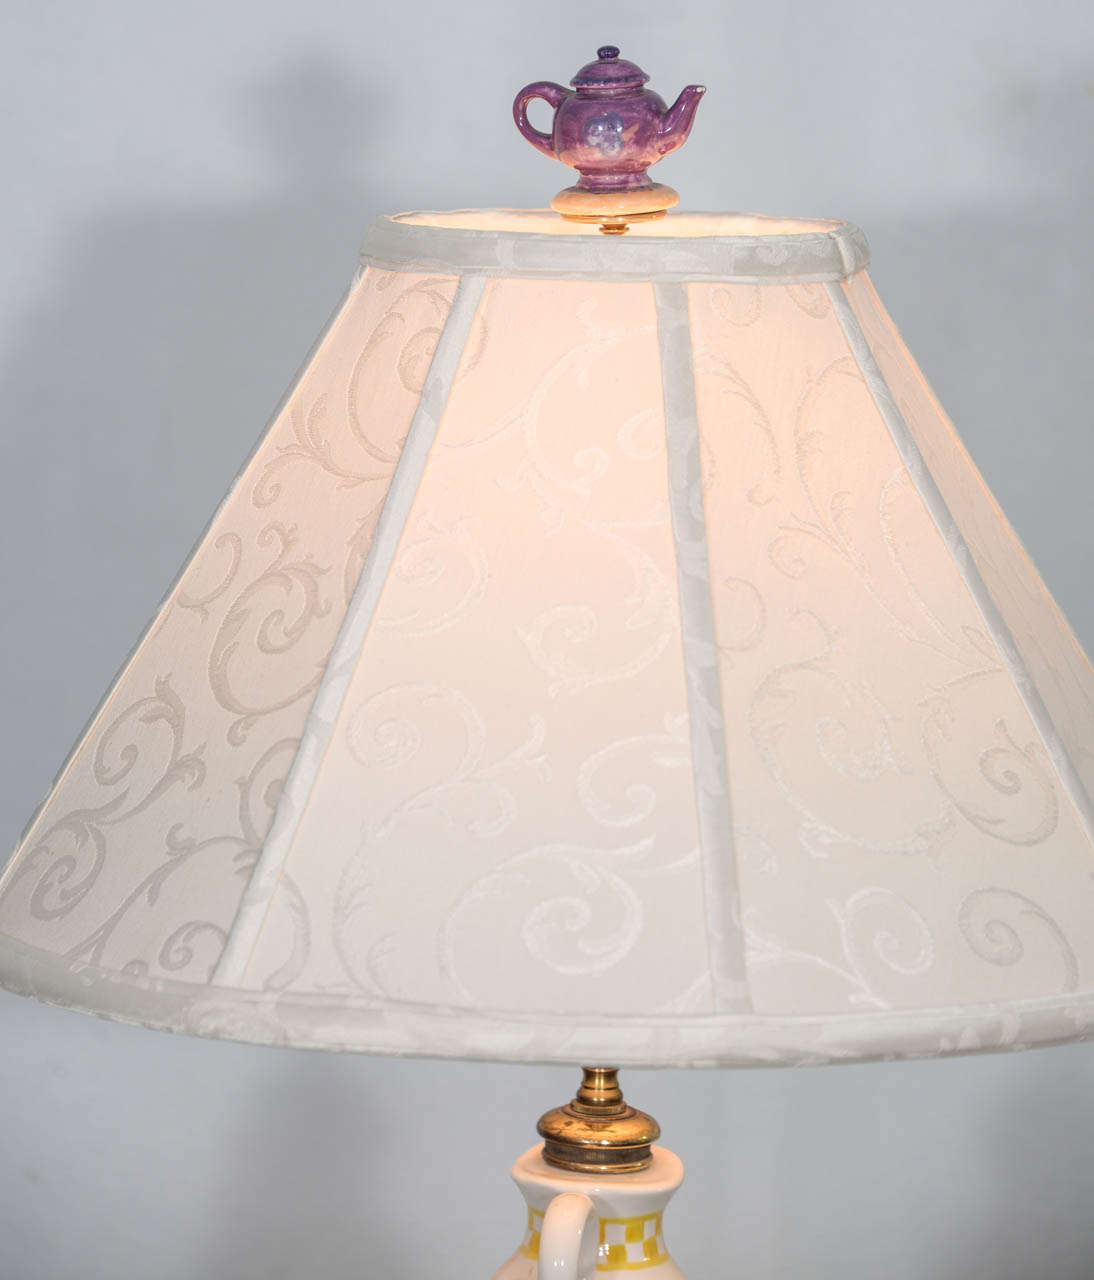 whimsical lamps